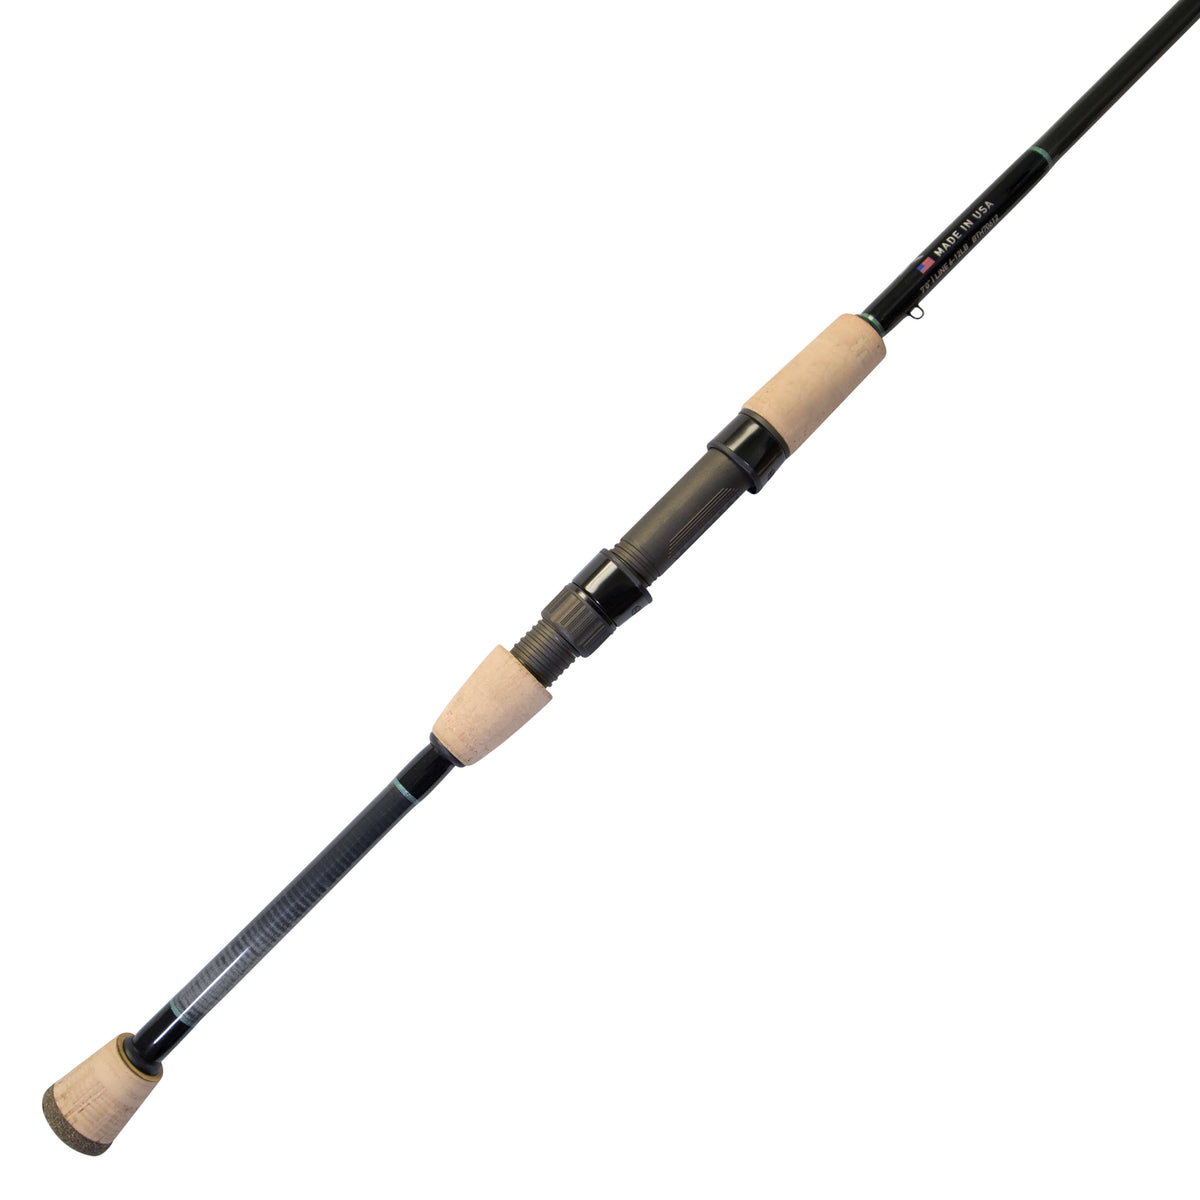 BlacktipH Split-Grip 6-12lb Spinning Rod with Graphite Reel Seat